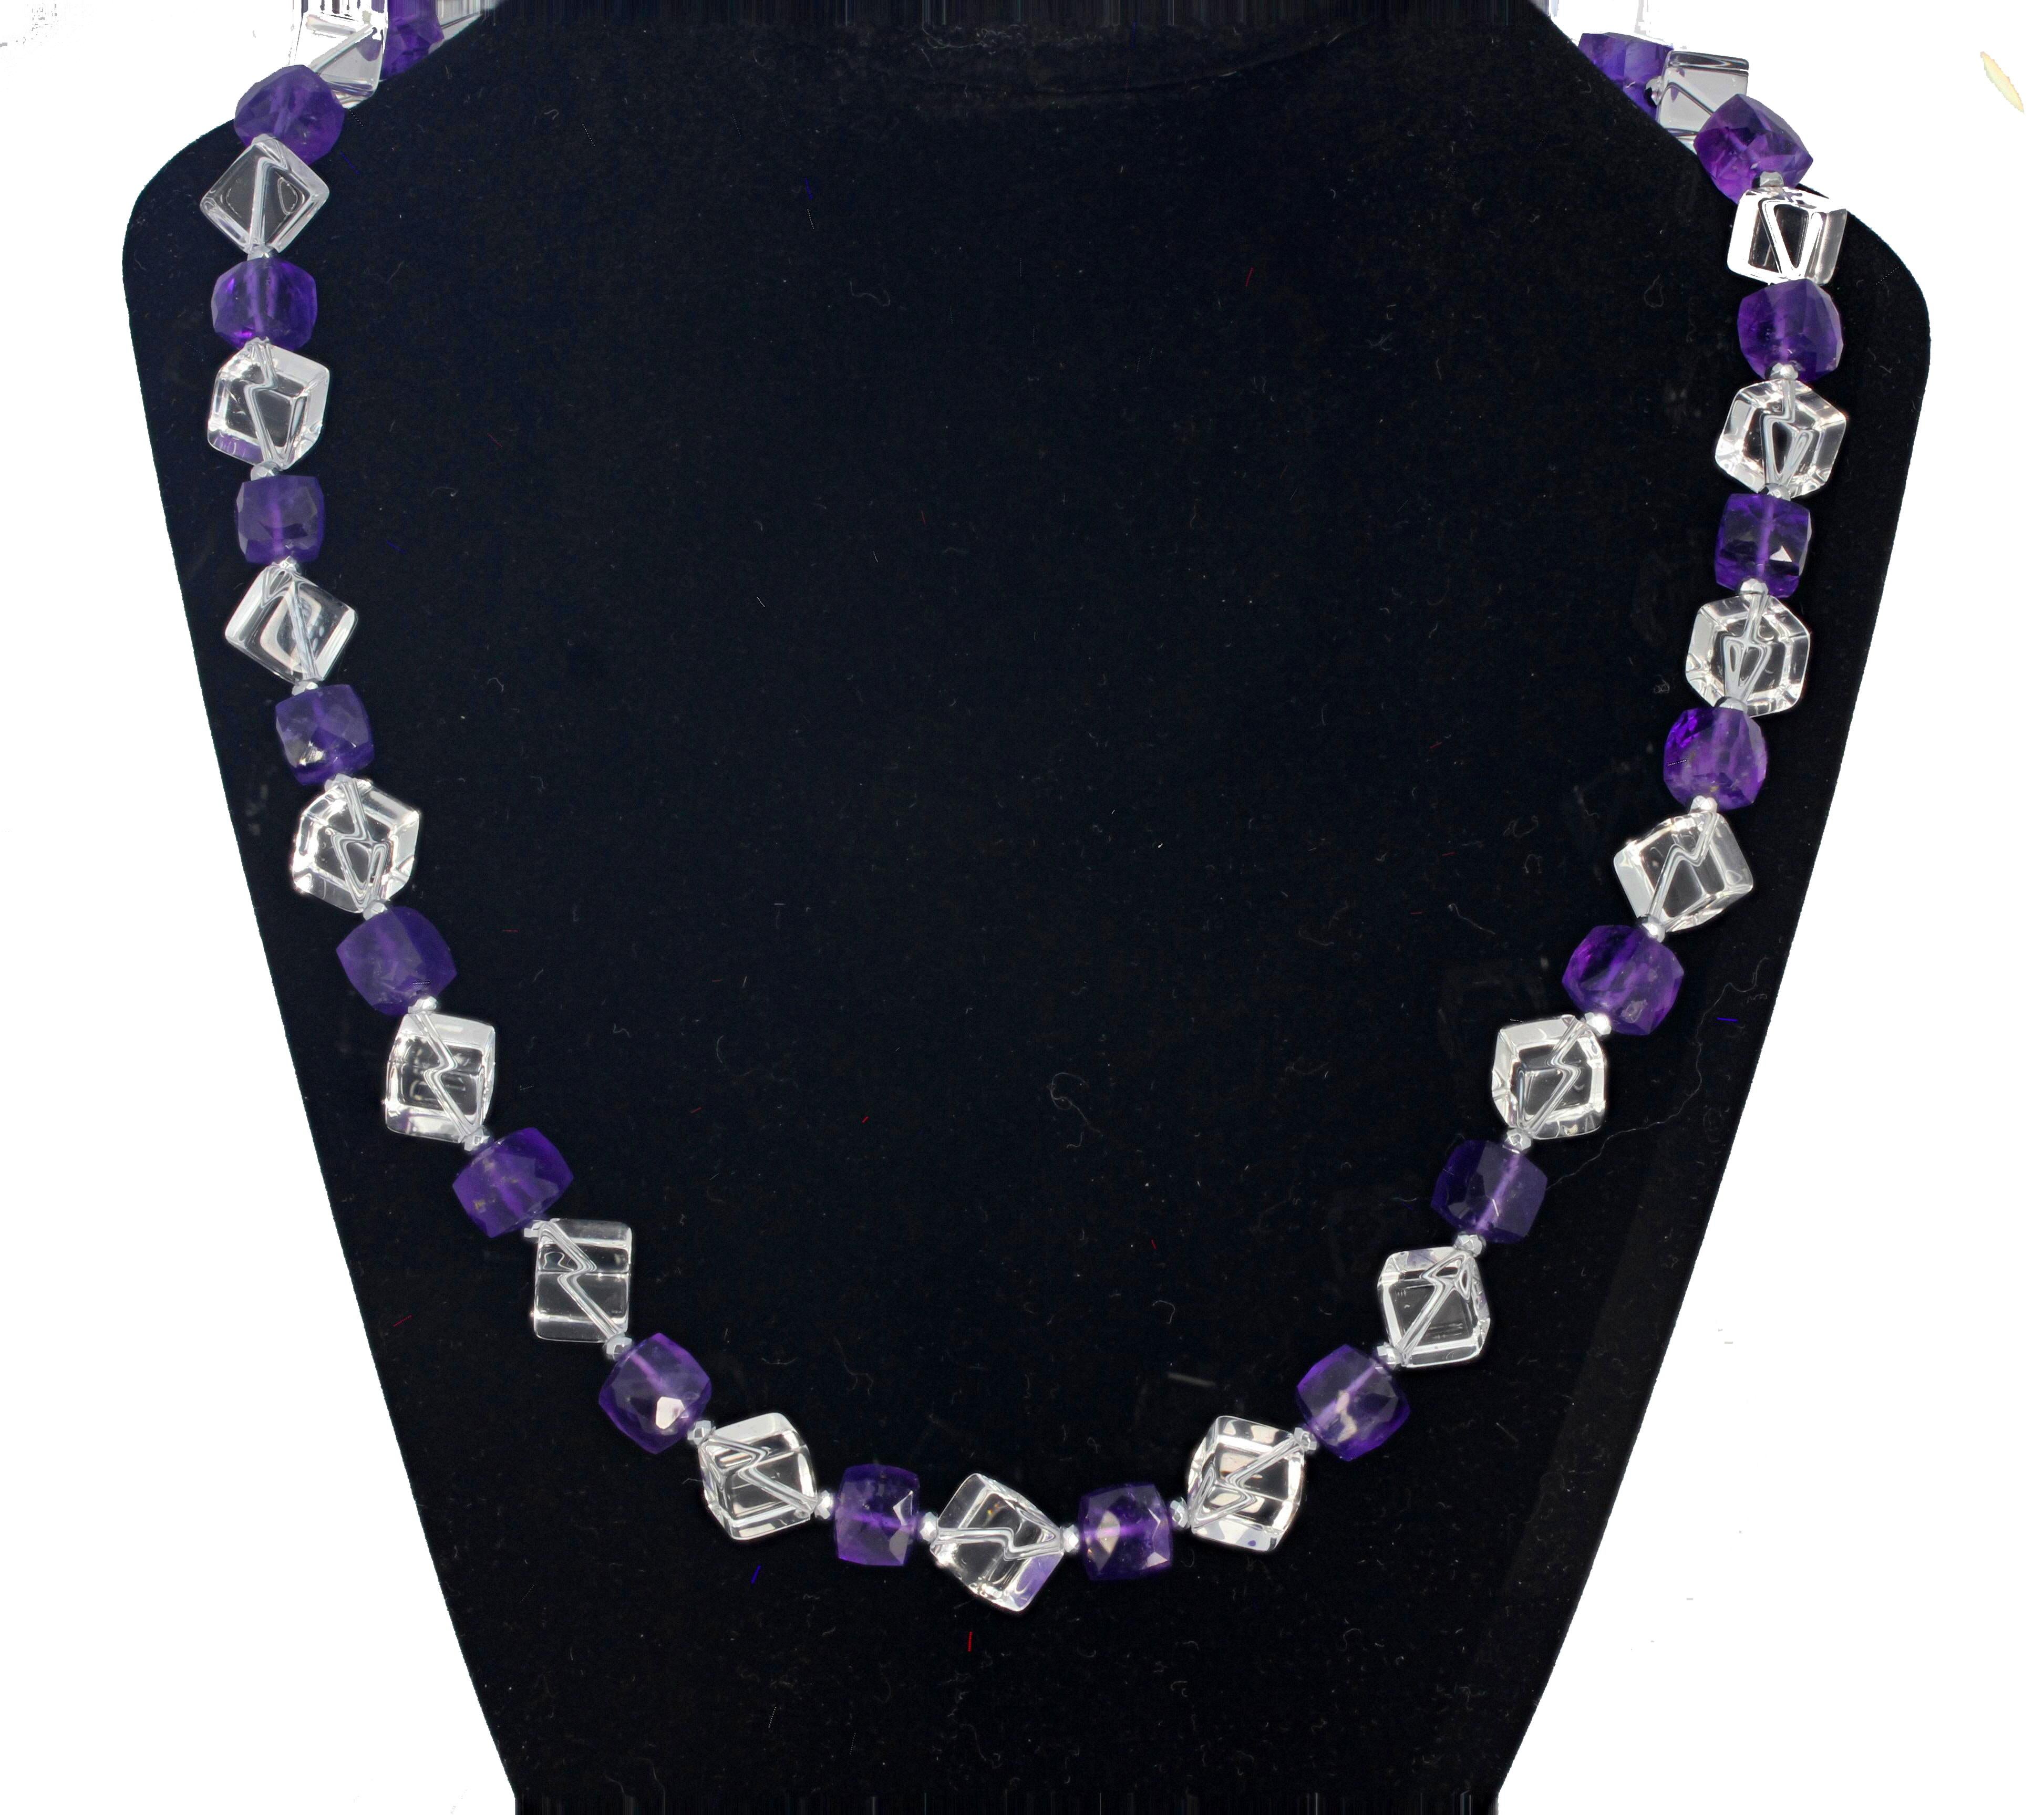 This superbly elegant glittering natural cube cut clear Quartz necklace is enhanced  with checkerboard gem cut natural Amethysts.  The Quartz cubes are 9mm x 9mm and the clasp is a sterling silver plated easy-to-use hook on this 20 1/4 inch long